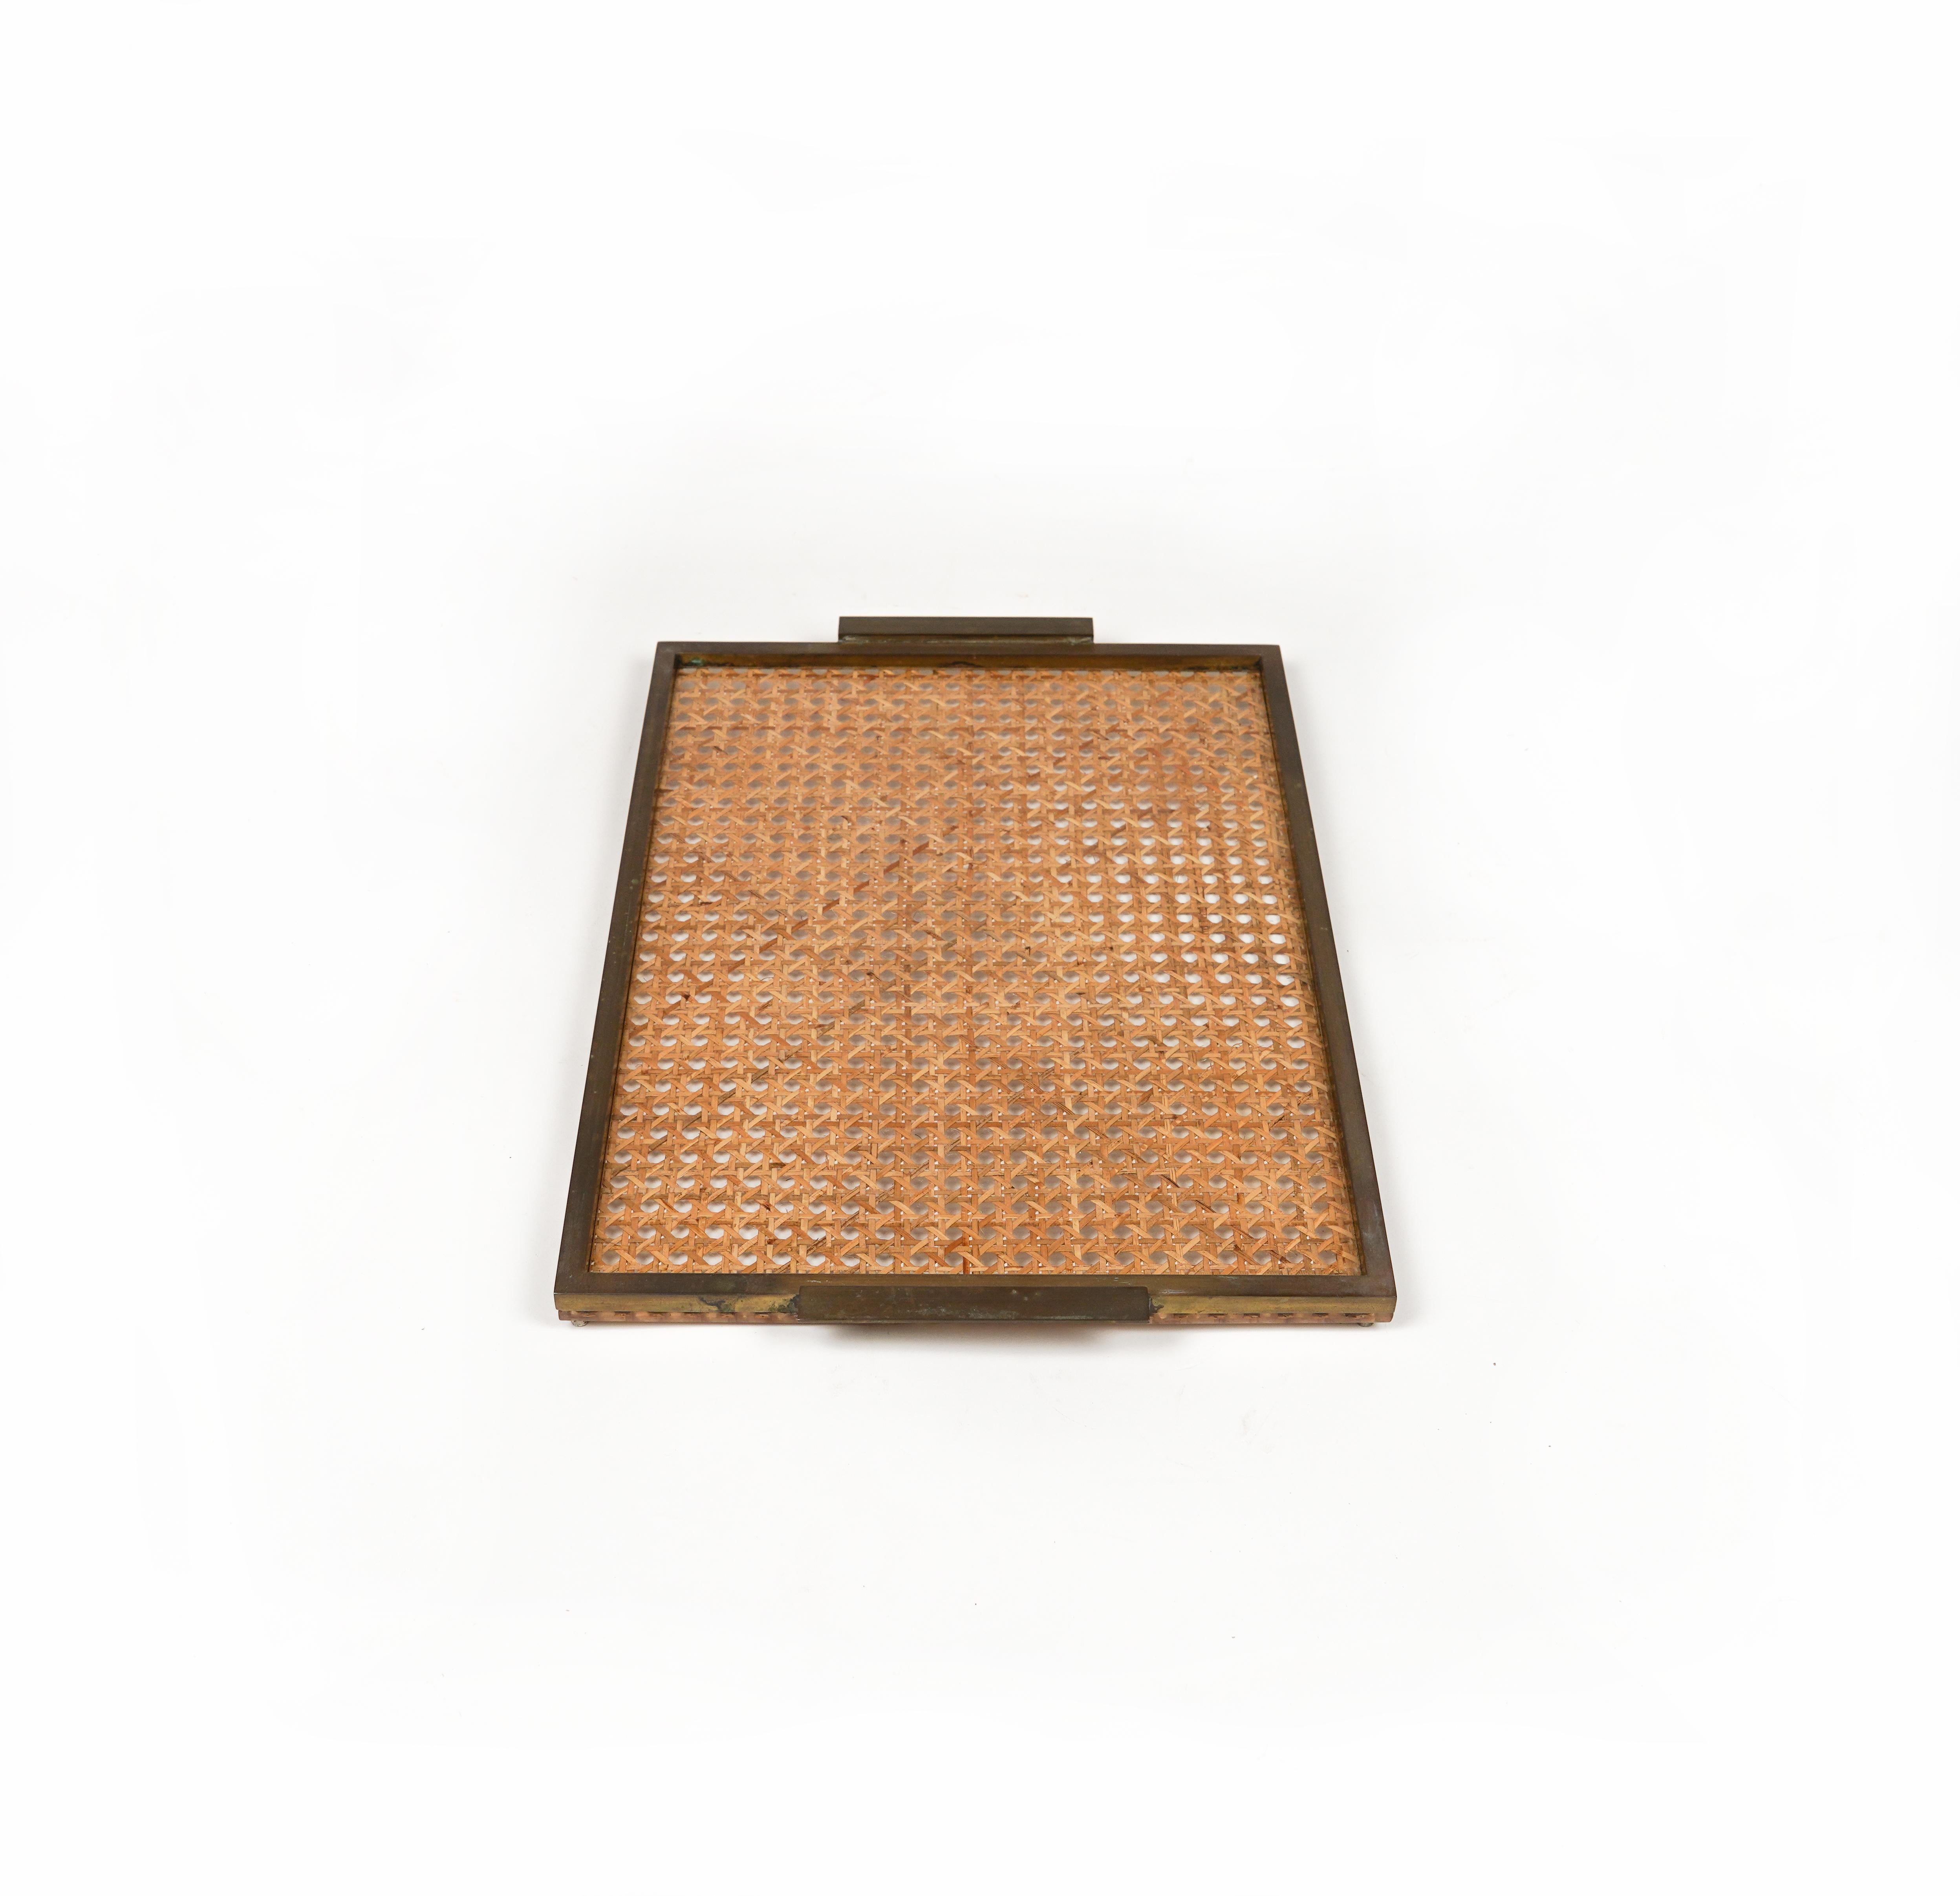 Late 20th Century Serving Tray in Lucite, Rattan & Brass Christian Dior Style, Italy, 1970s For Sale